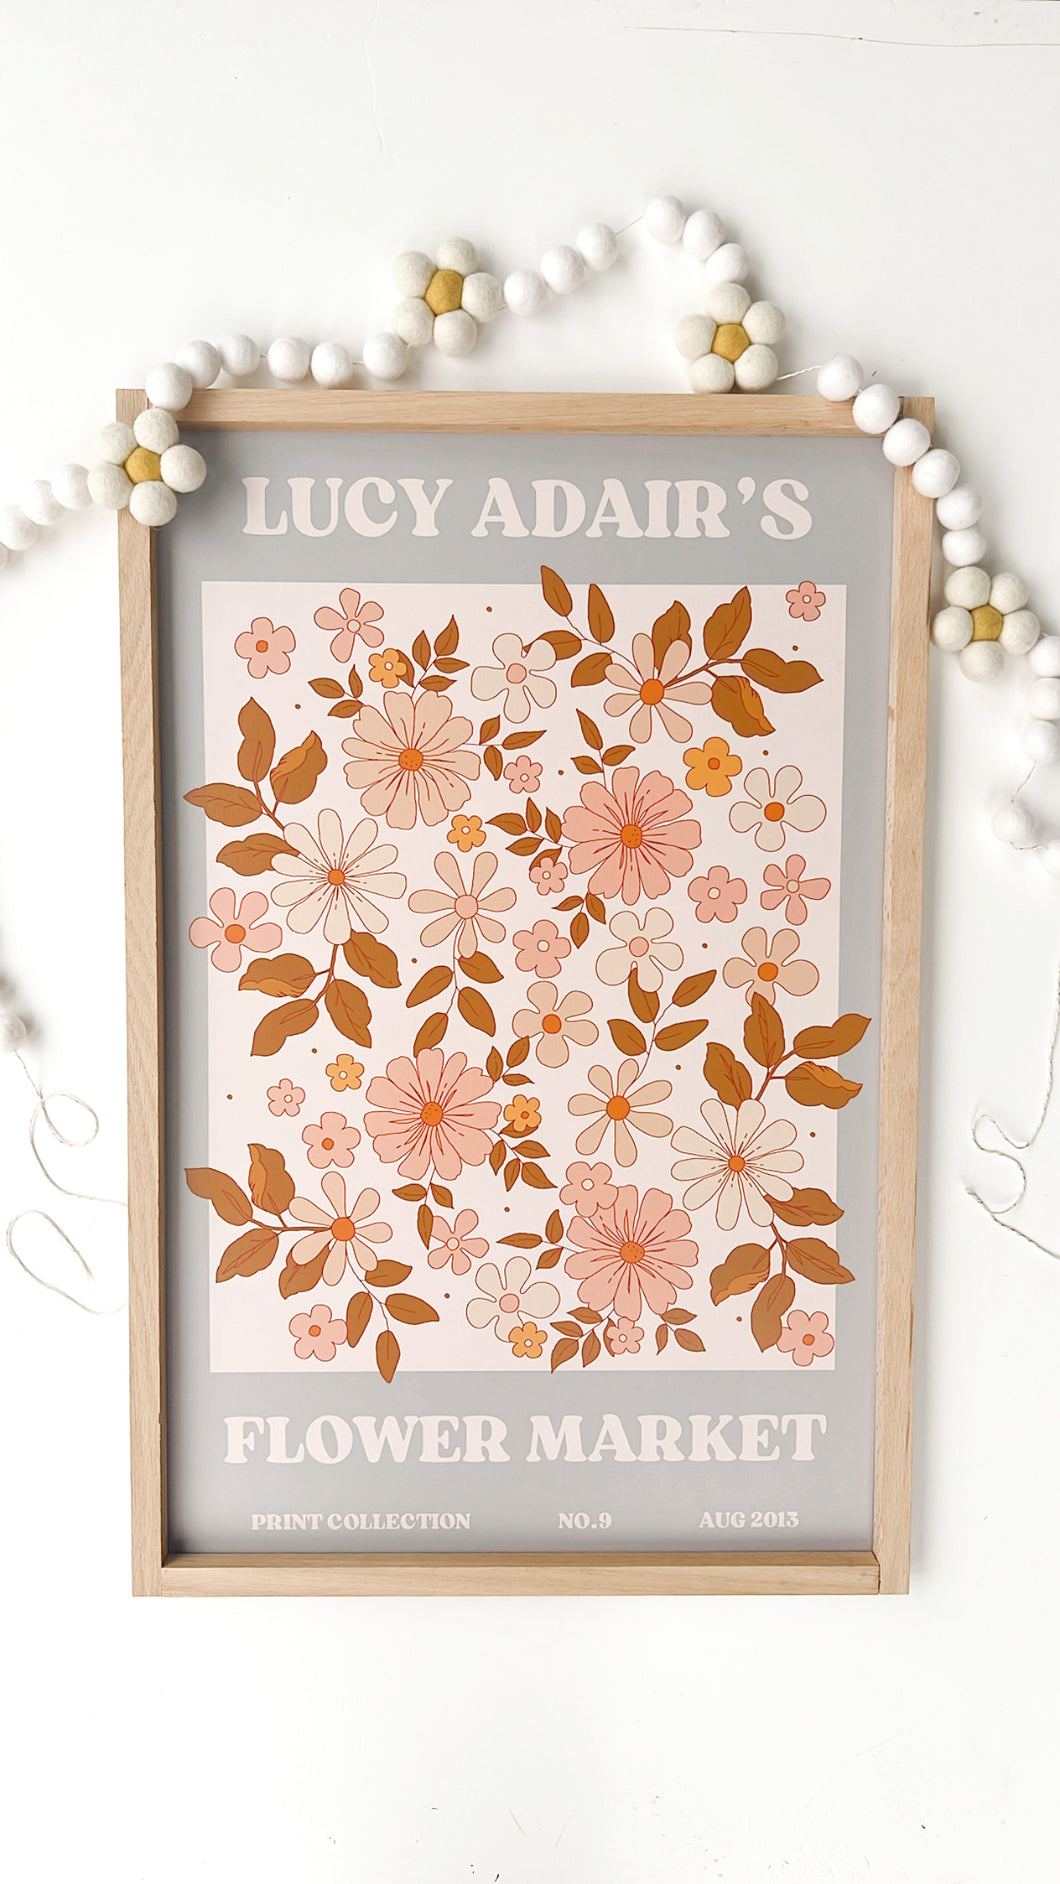 Flower Market- the Lucy